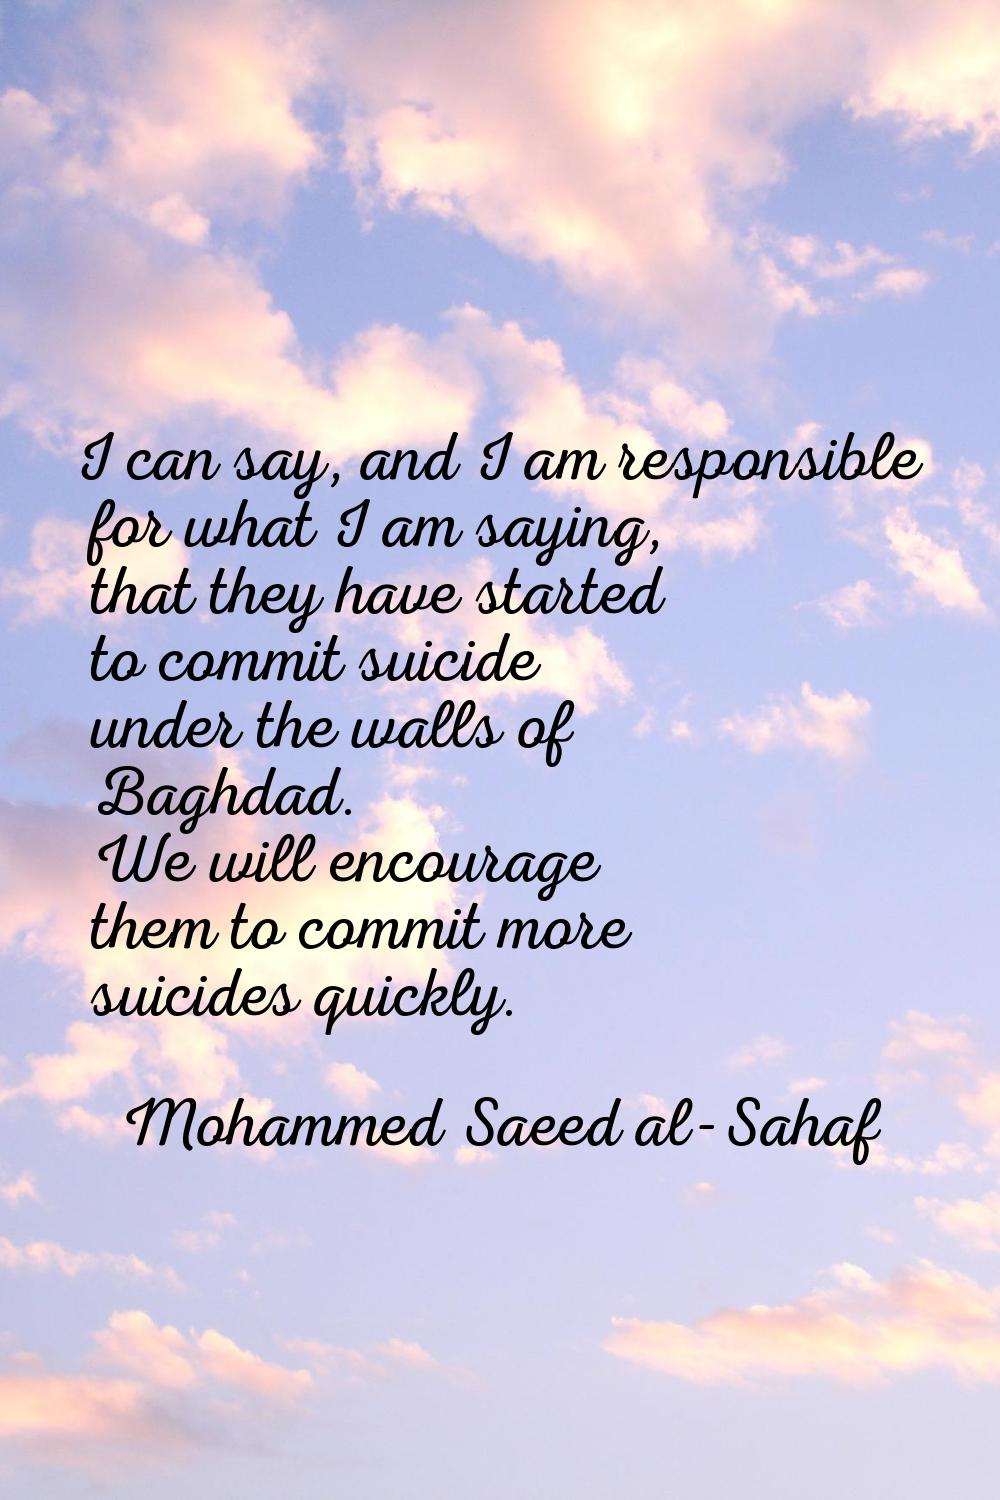 I can say, and I am responsible for what I am saying, that they have started to commit suicide unde